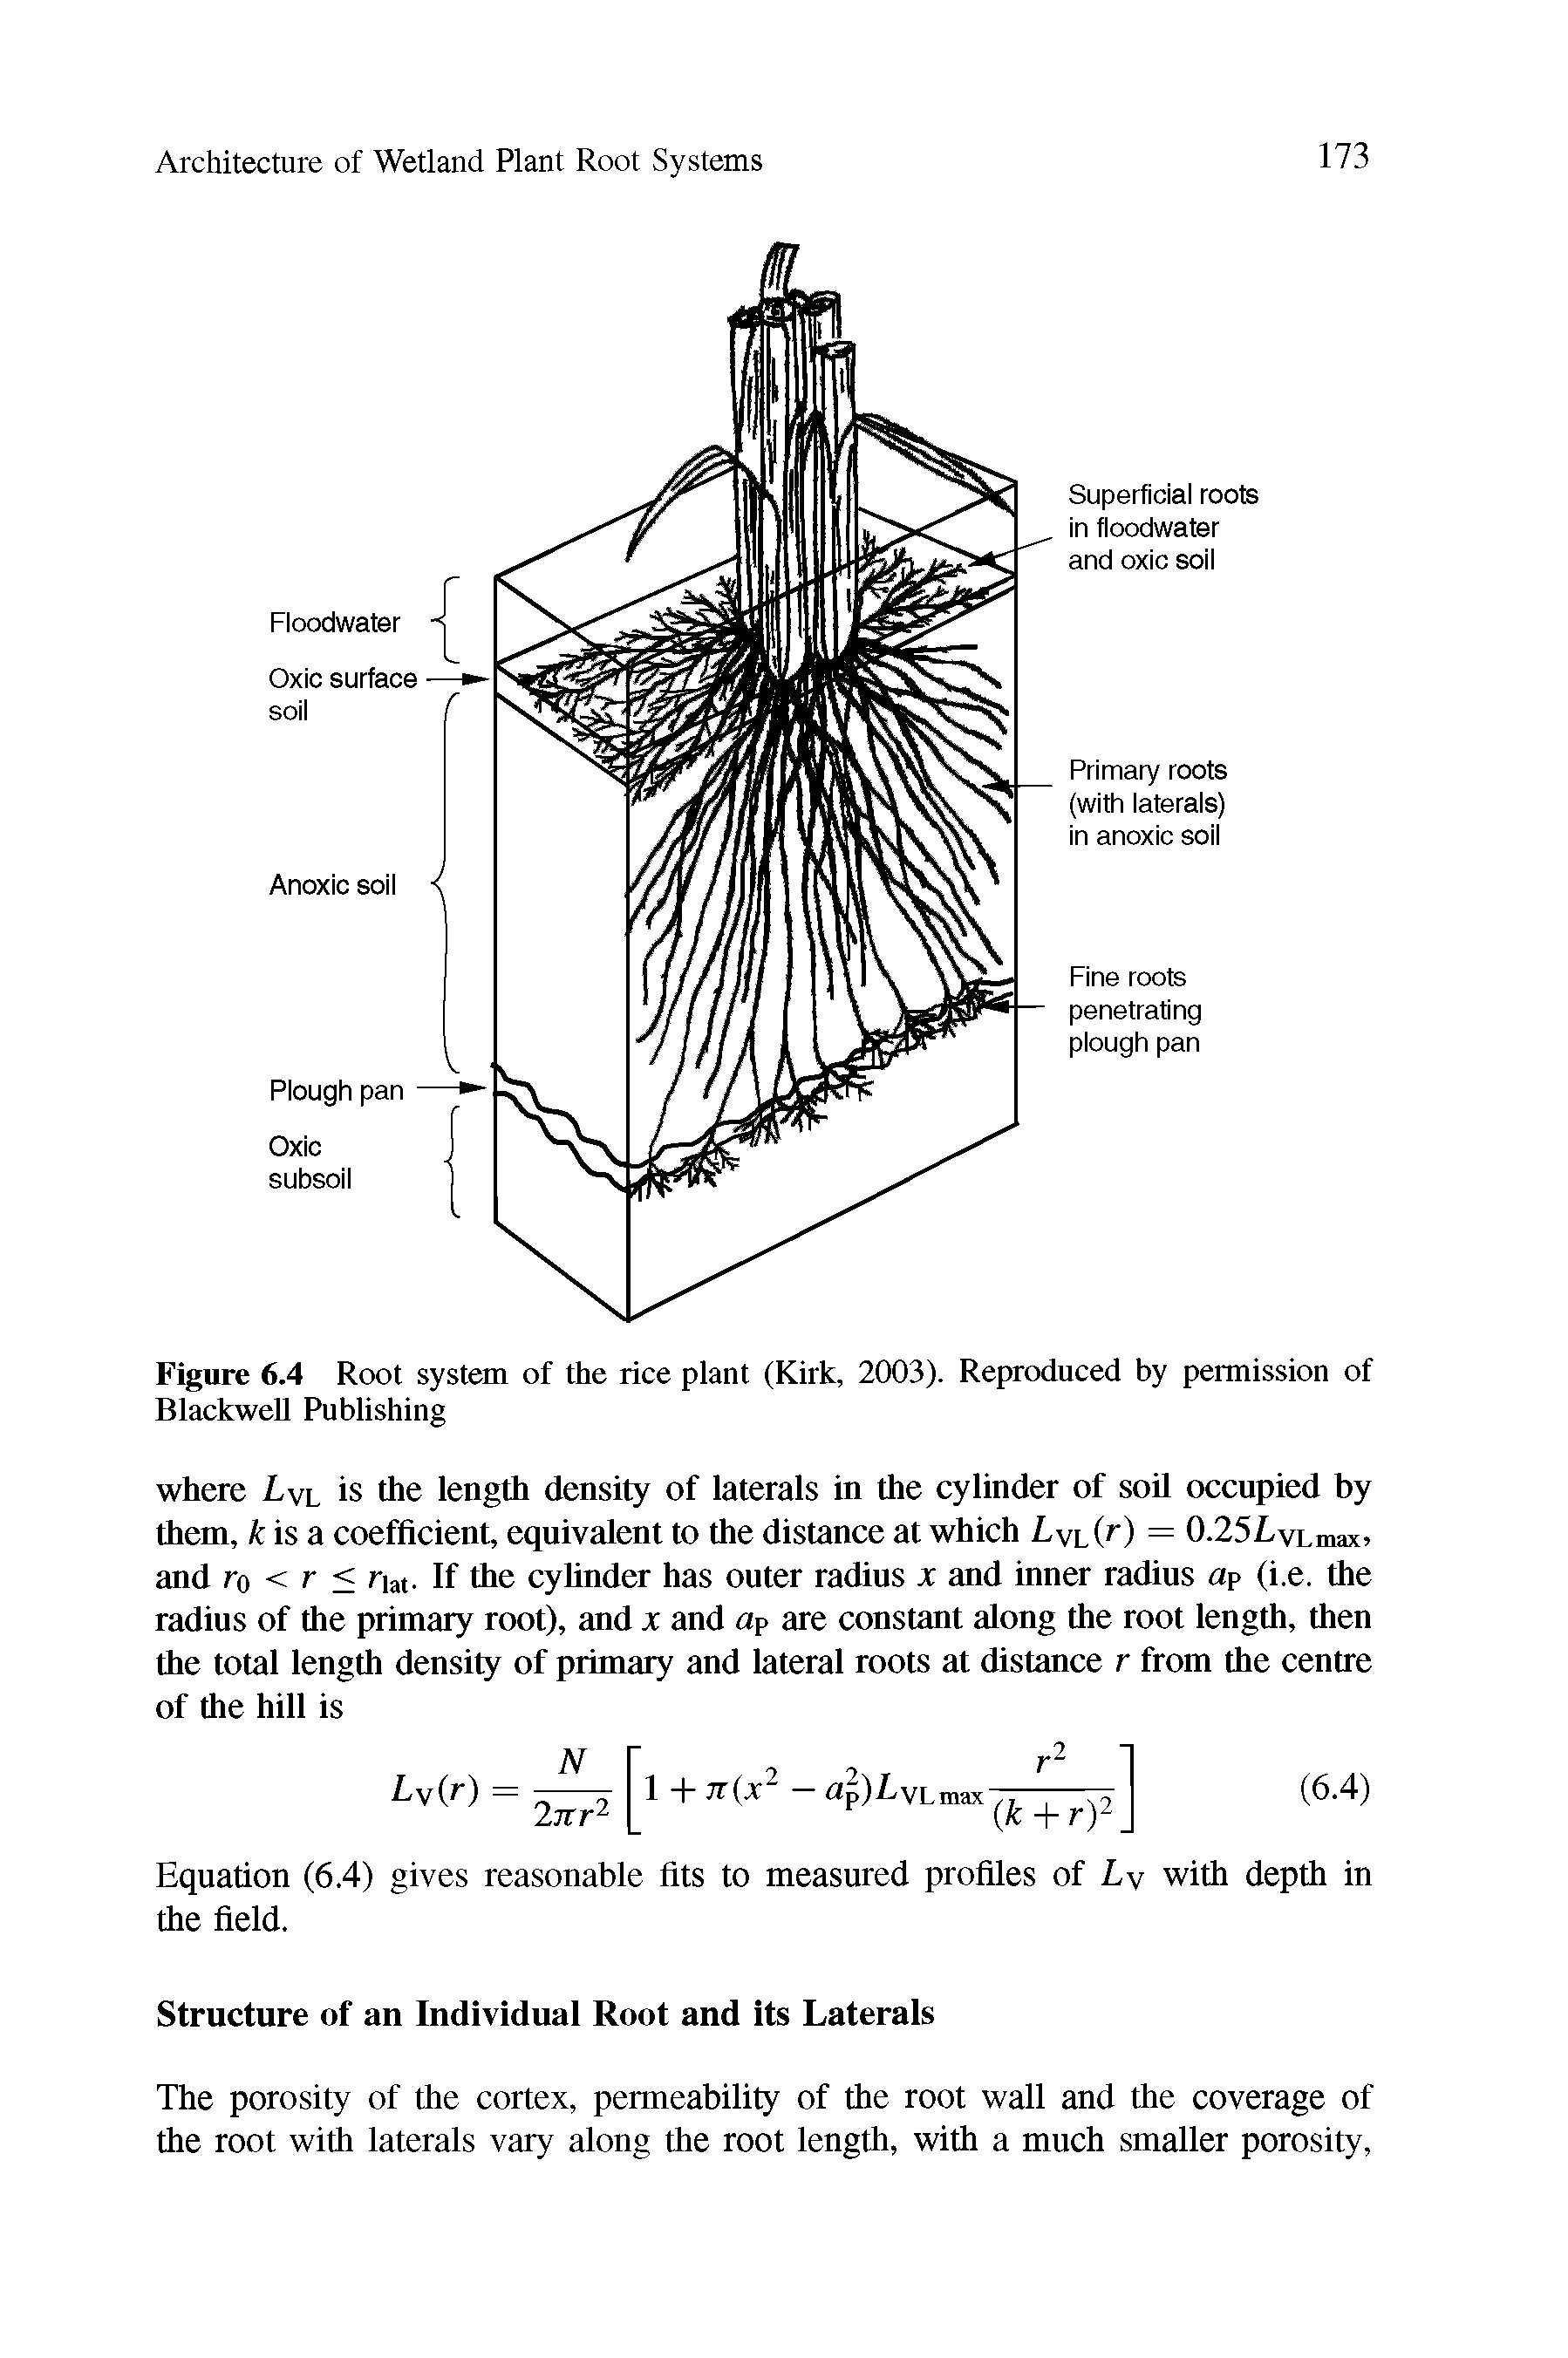 Figure 6.4 Root system of the rice plant (Kirk, 2003). Reproduced by permission of Blackwell Publishing...